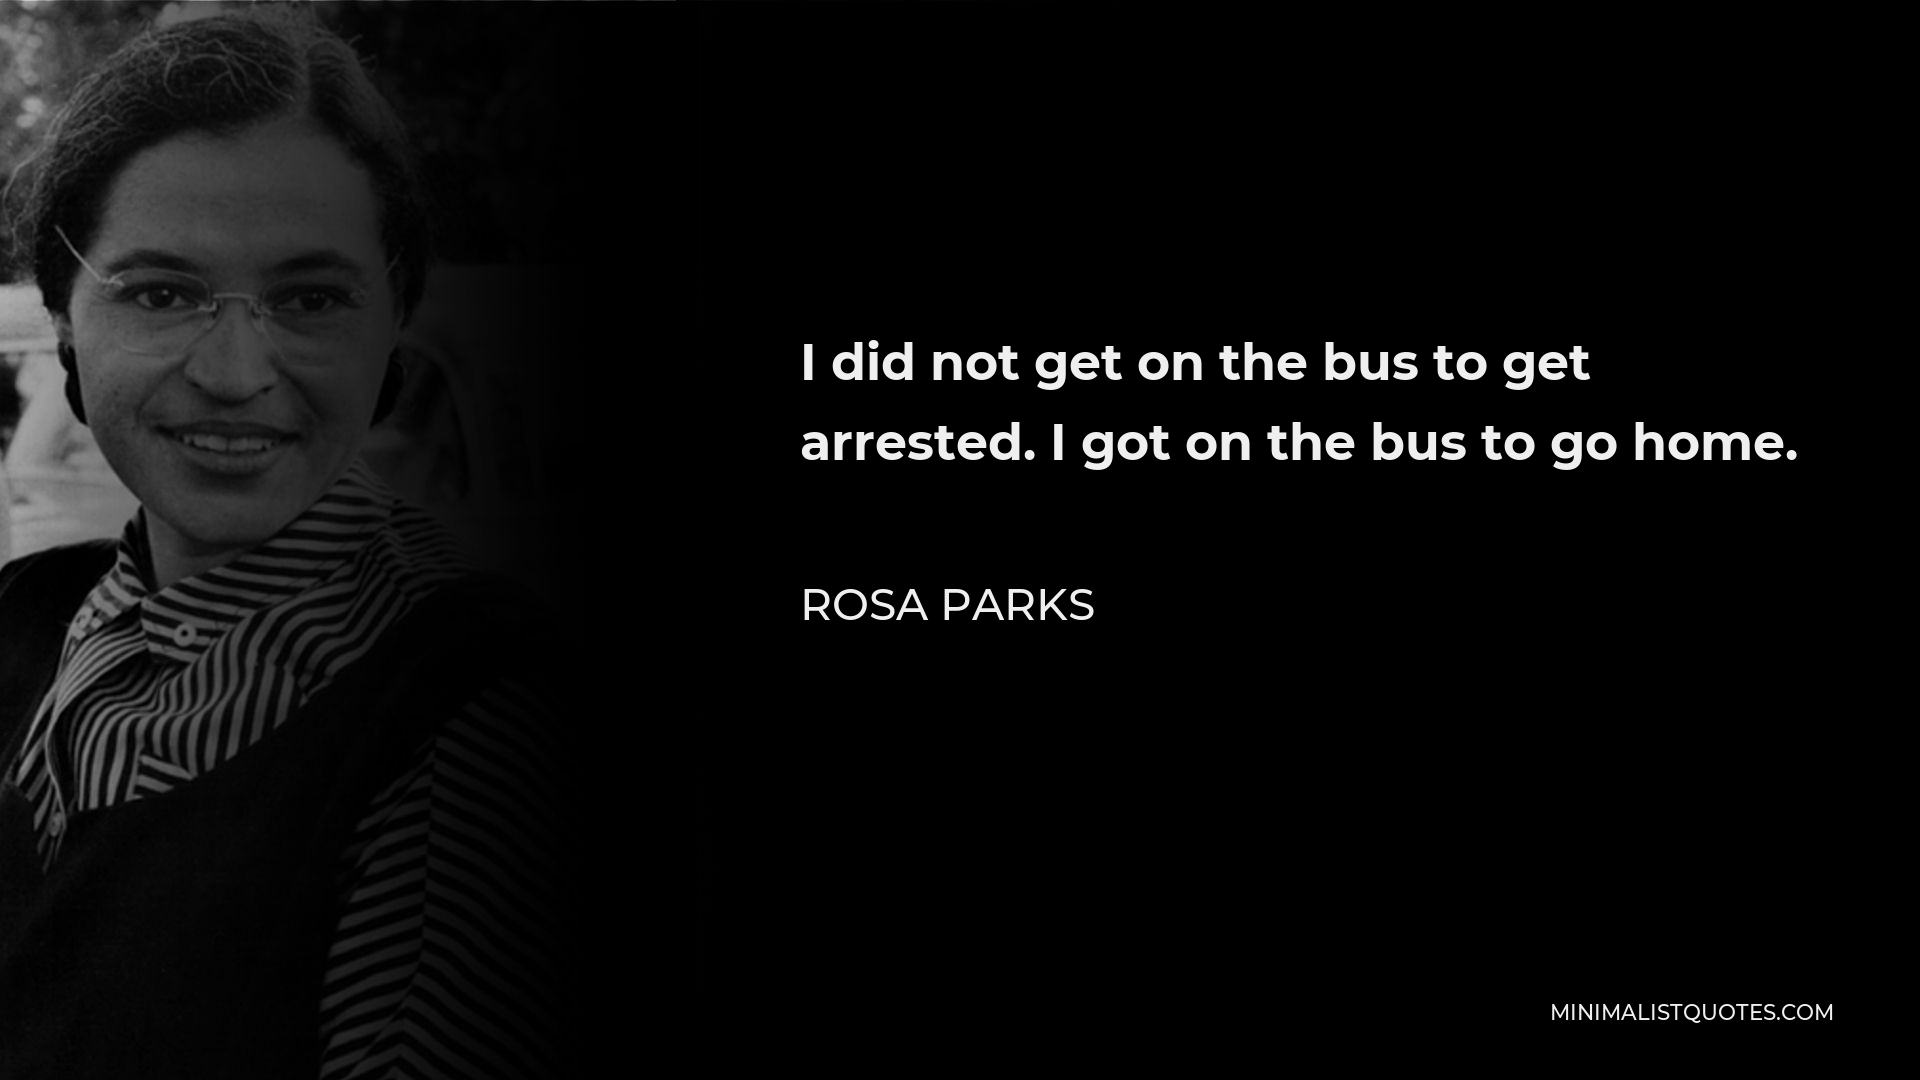 Rosa Parks Quote - I did not get on the bus to get arrested. I got on the bus to go home.